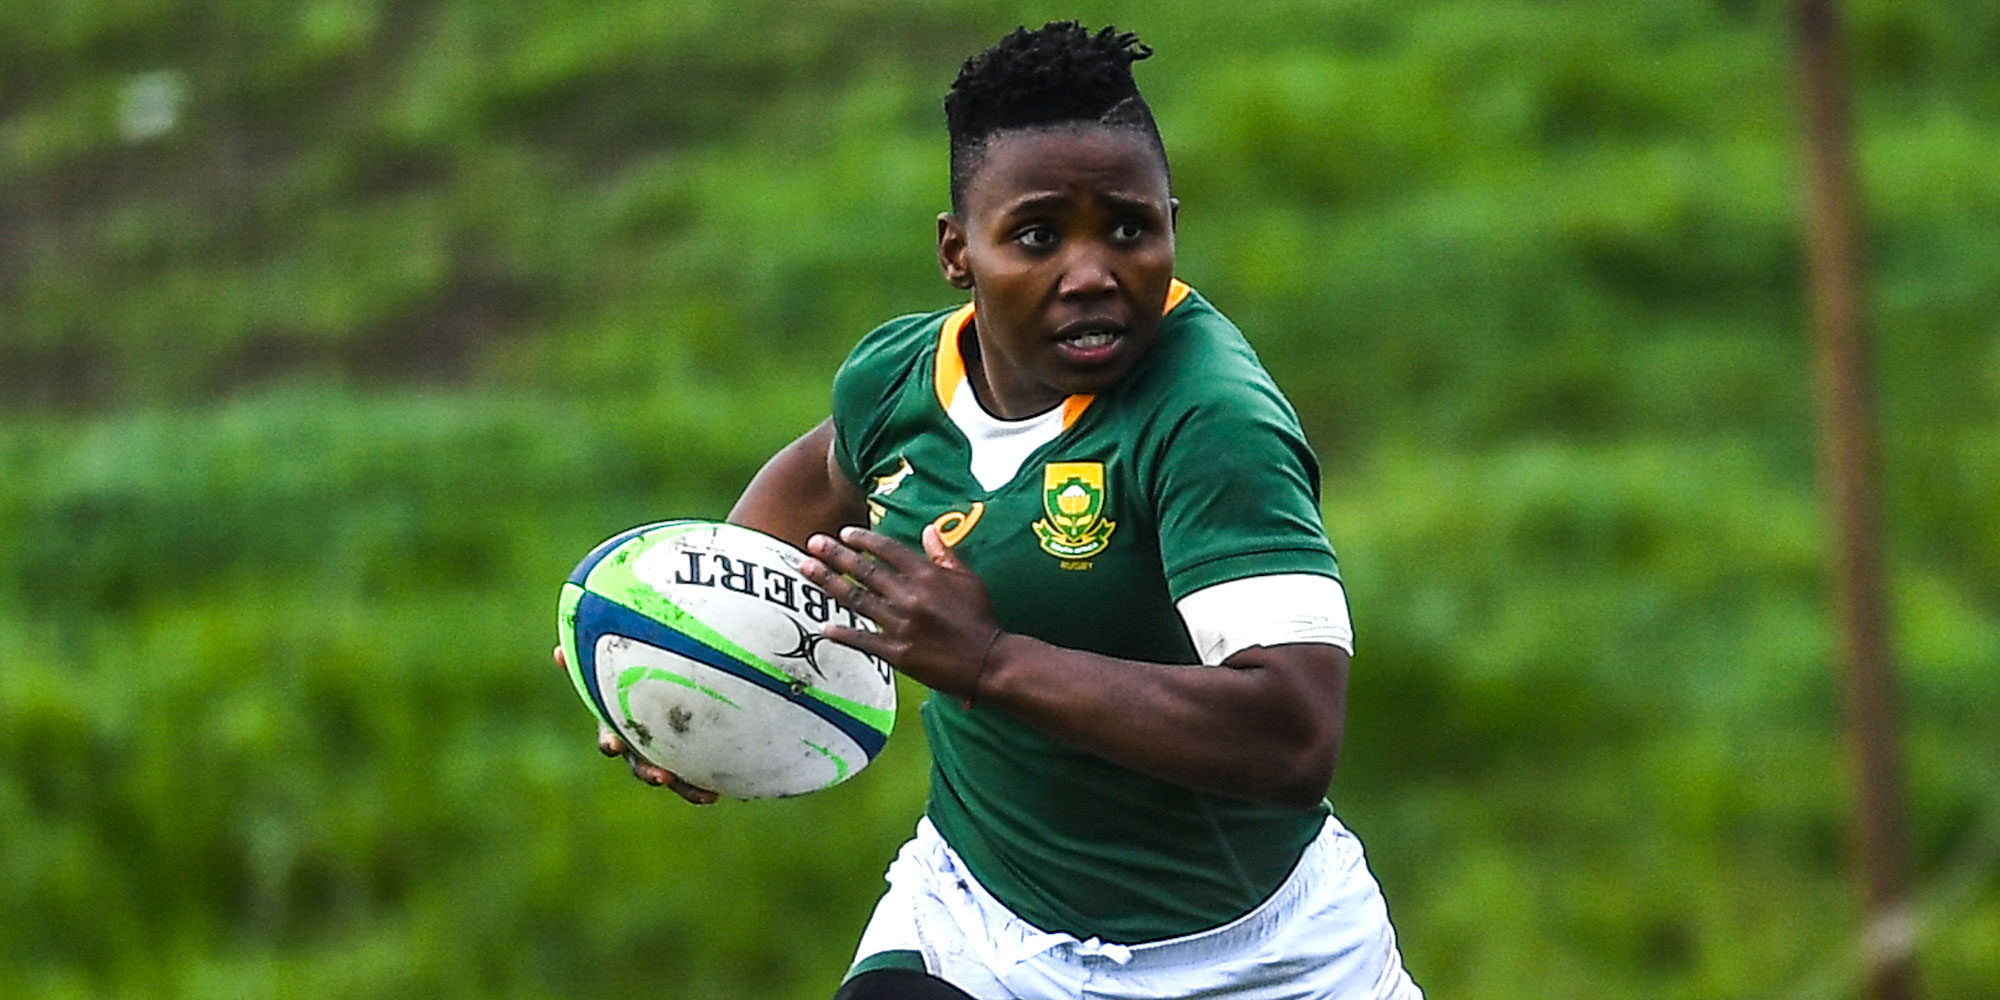 Simamkele Namba scored four tries after coming off the bench.